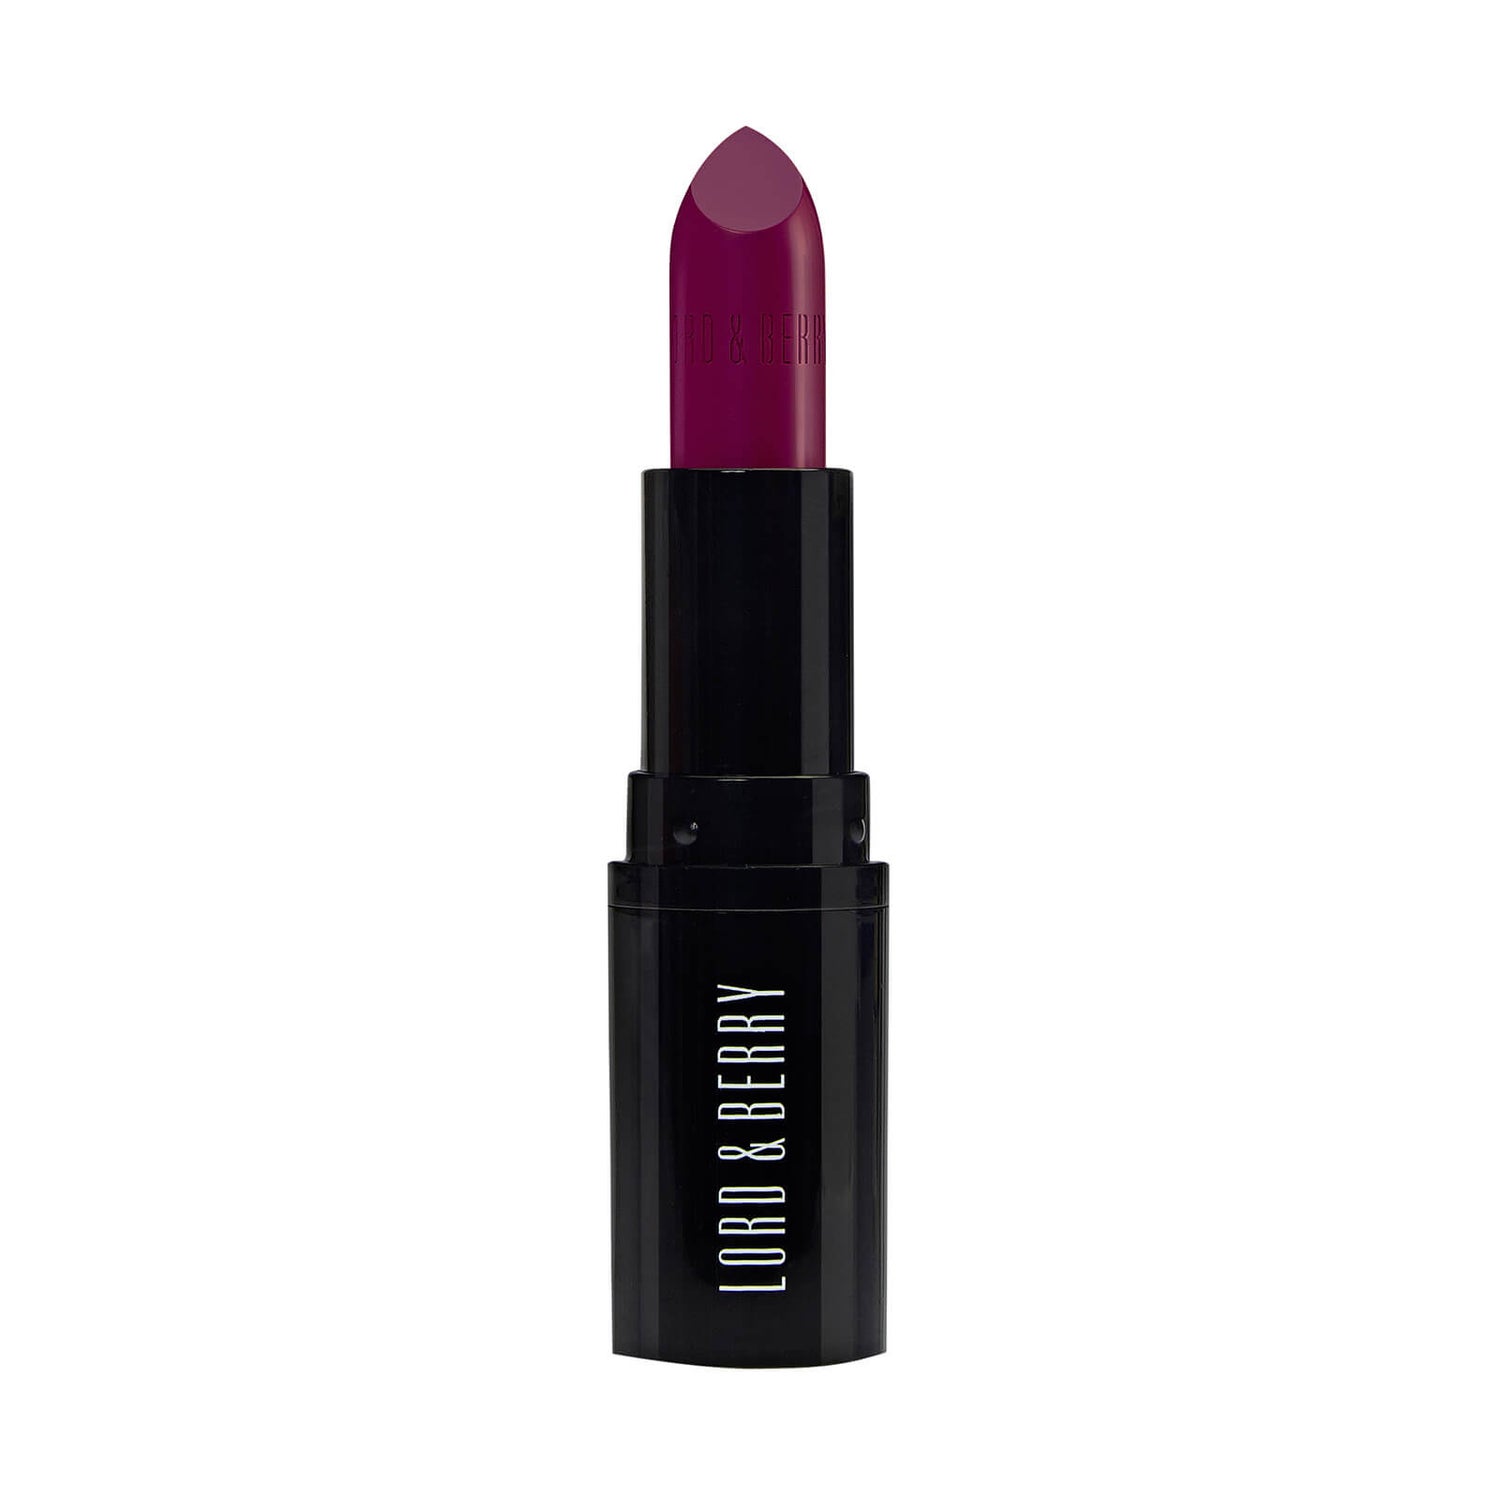 Lord & Berry Absolute Lipstick 23g (Various Shades)